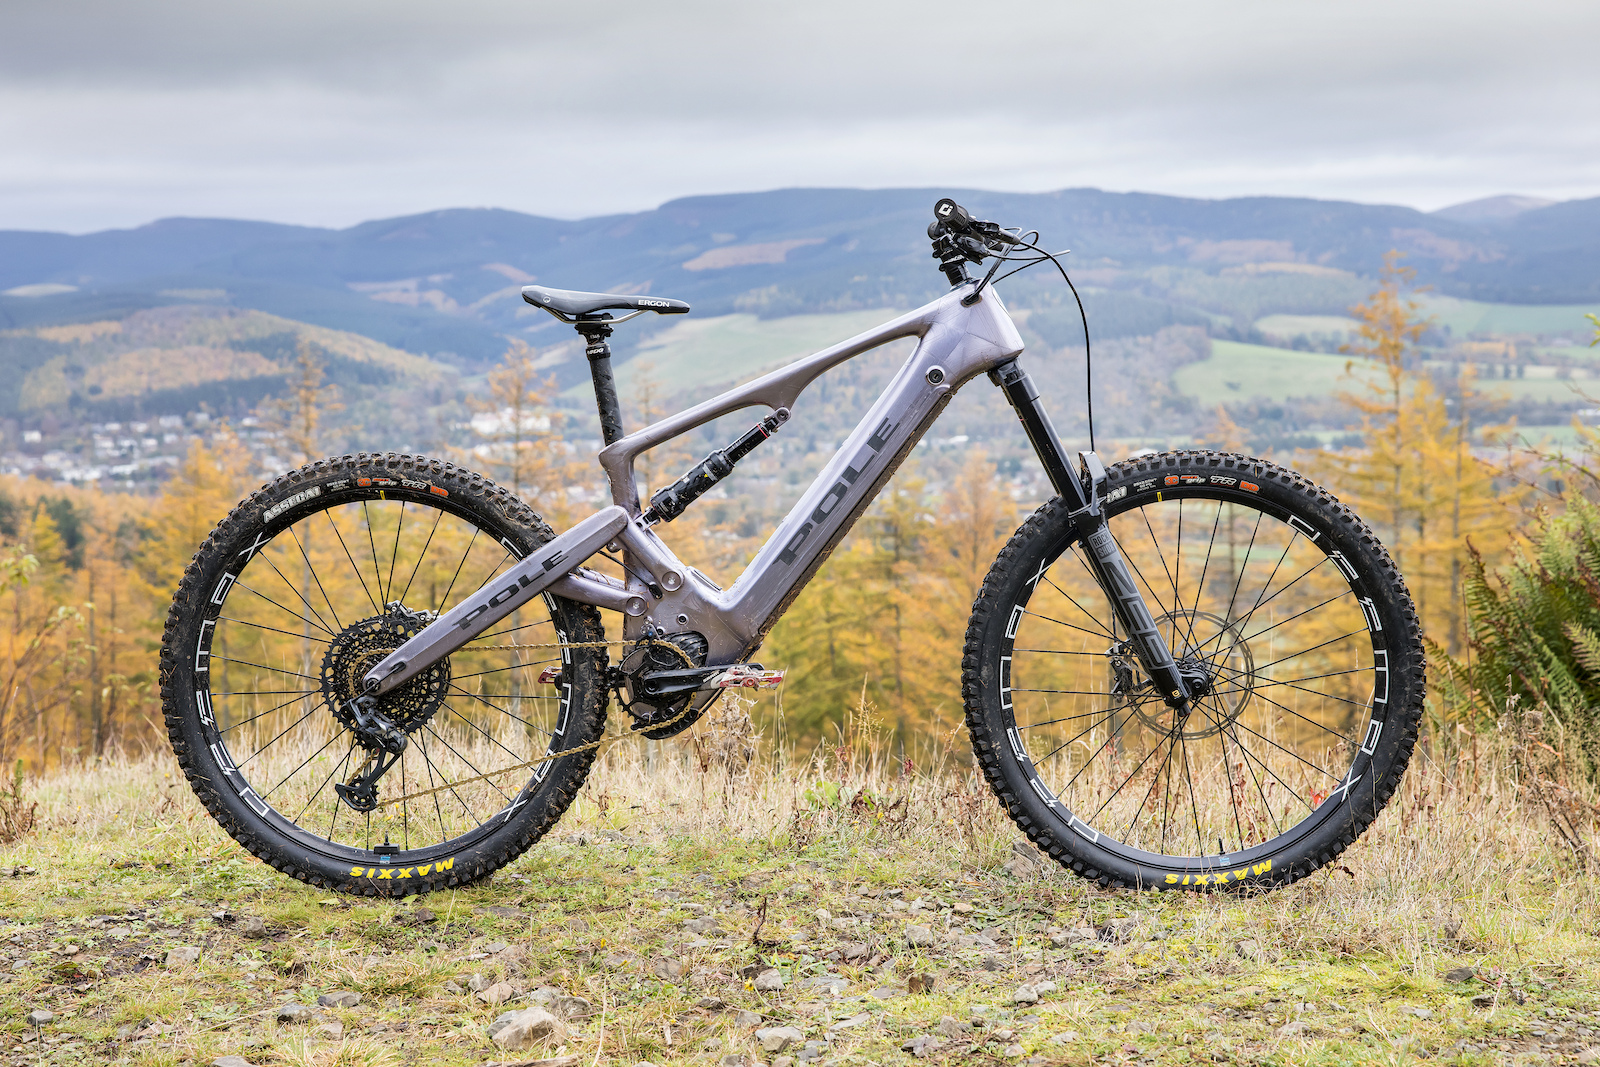 Review: Pole's 190mm-Travel Voima is Long, Slack & High - Pinkbike